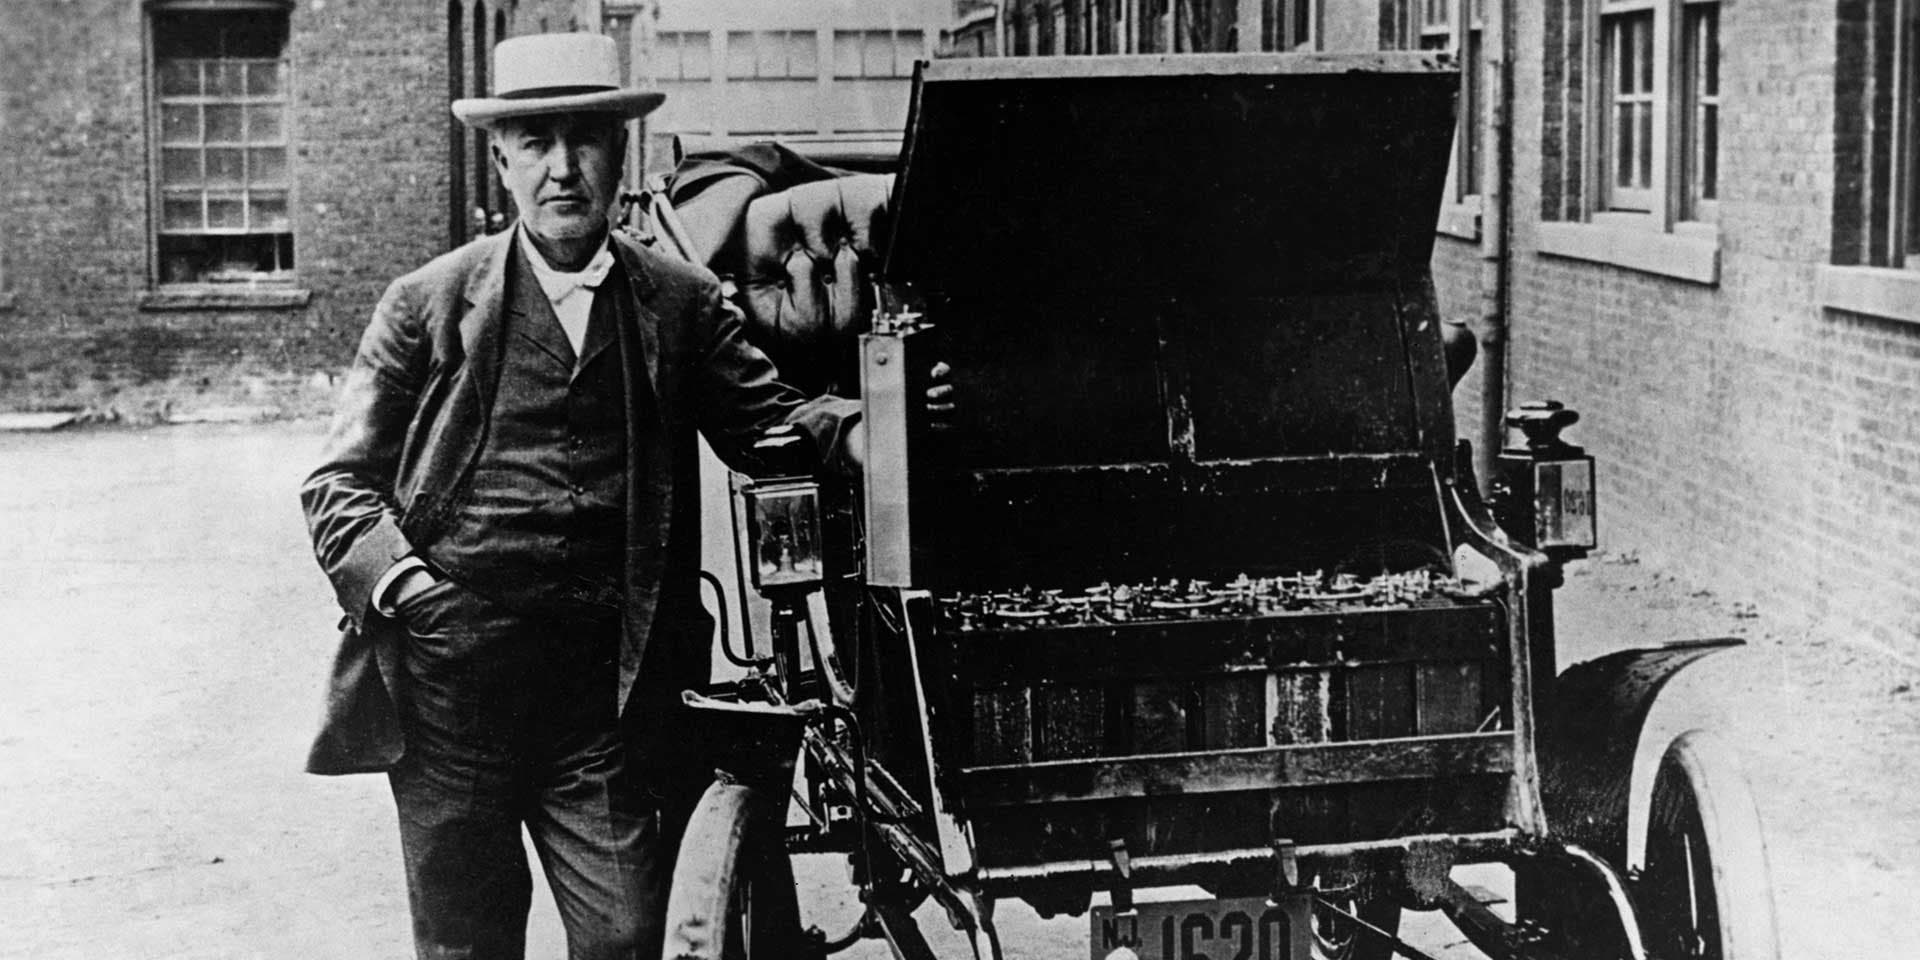 Thomas A. Edison stands next to his American Barker electric car, circa 1895.